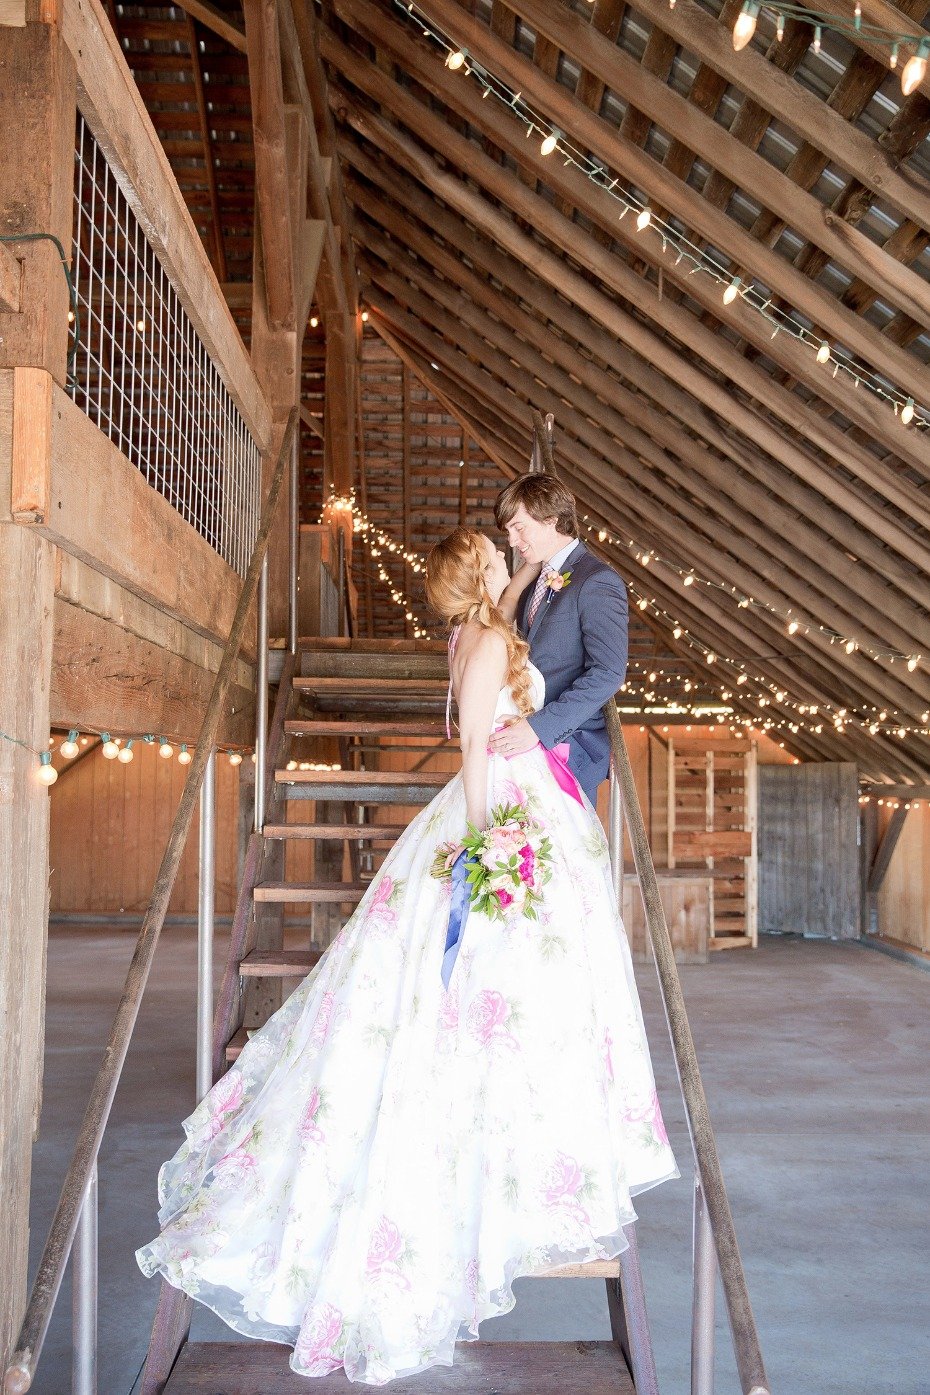 Floral wedding dress with pink bow